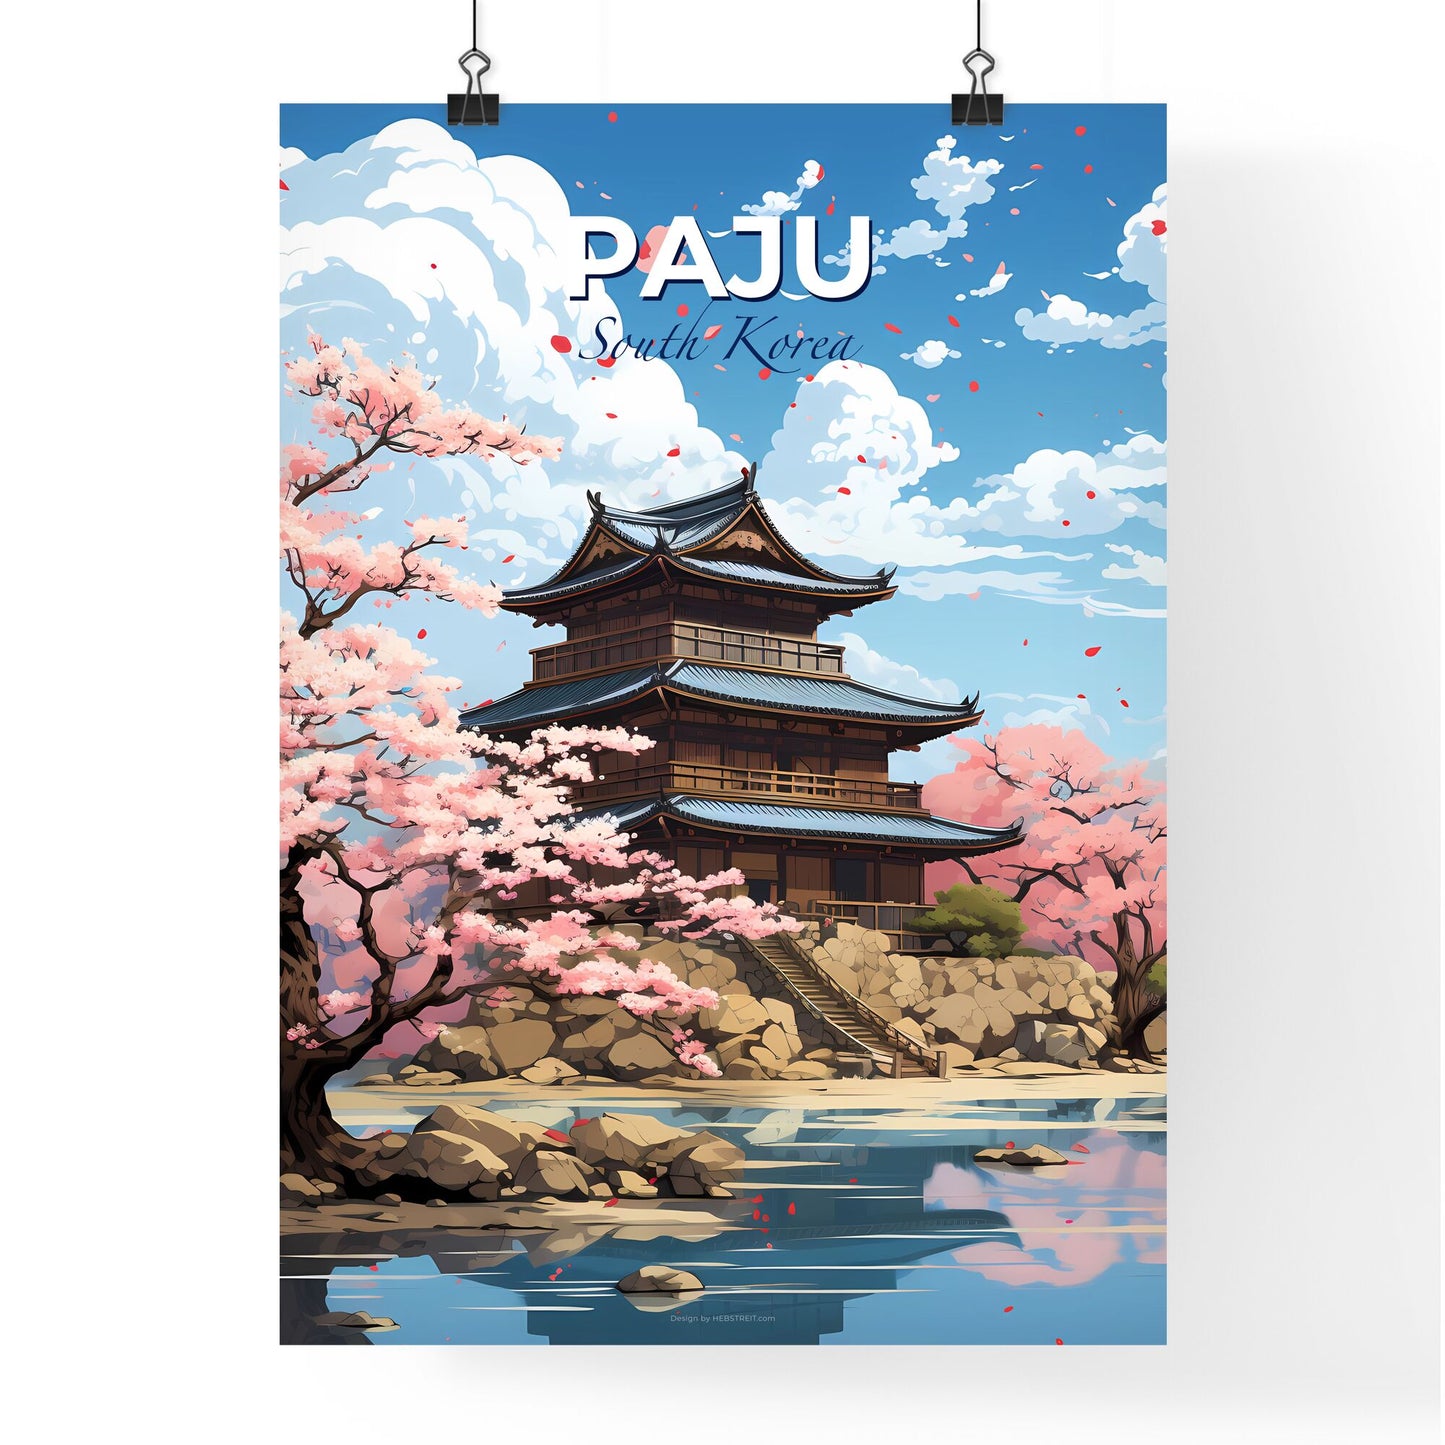 Colorful Korean Artwork of a Building on a Hill with Pink Trees and Water Default Title